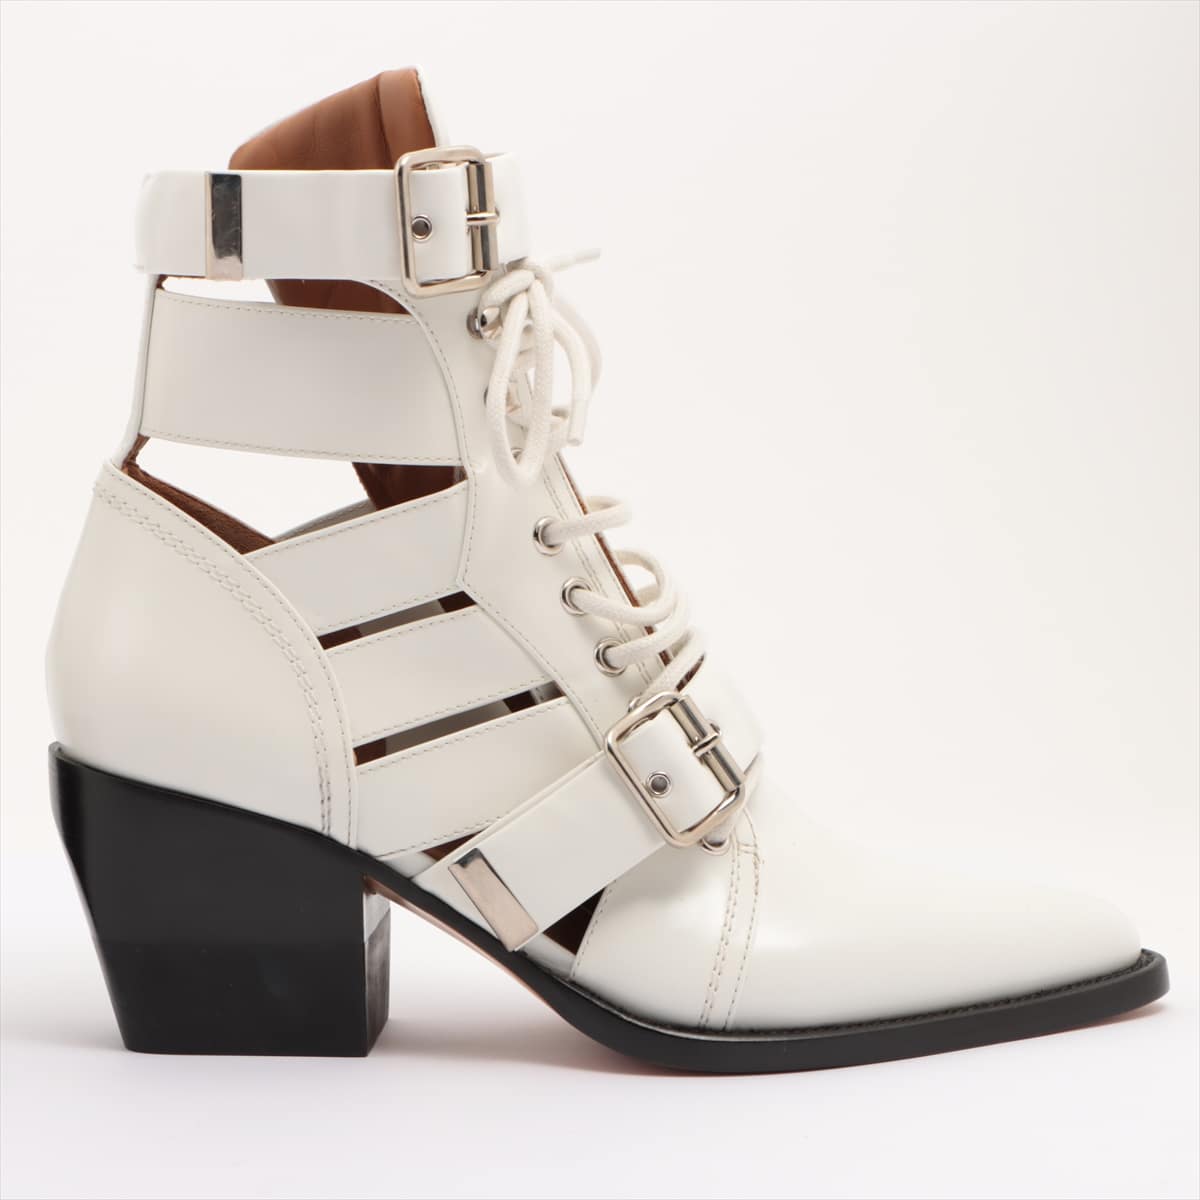 Chloe RYLEE Leather Boots 39 Ladies' White